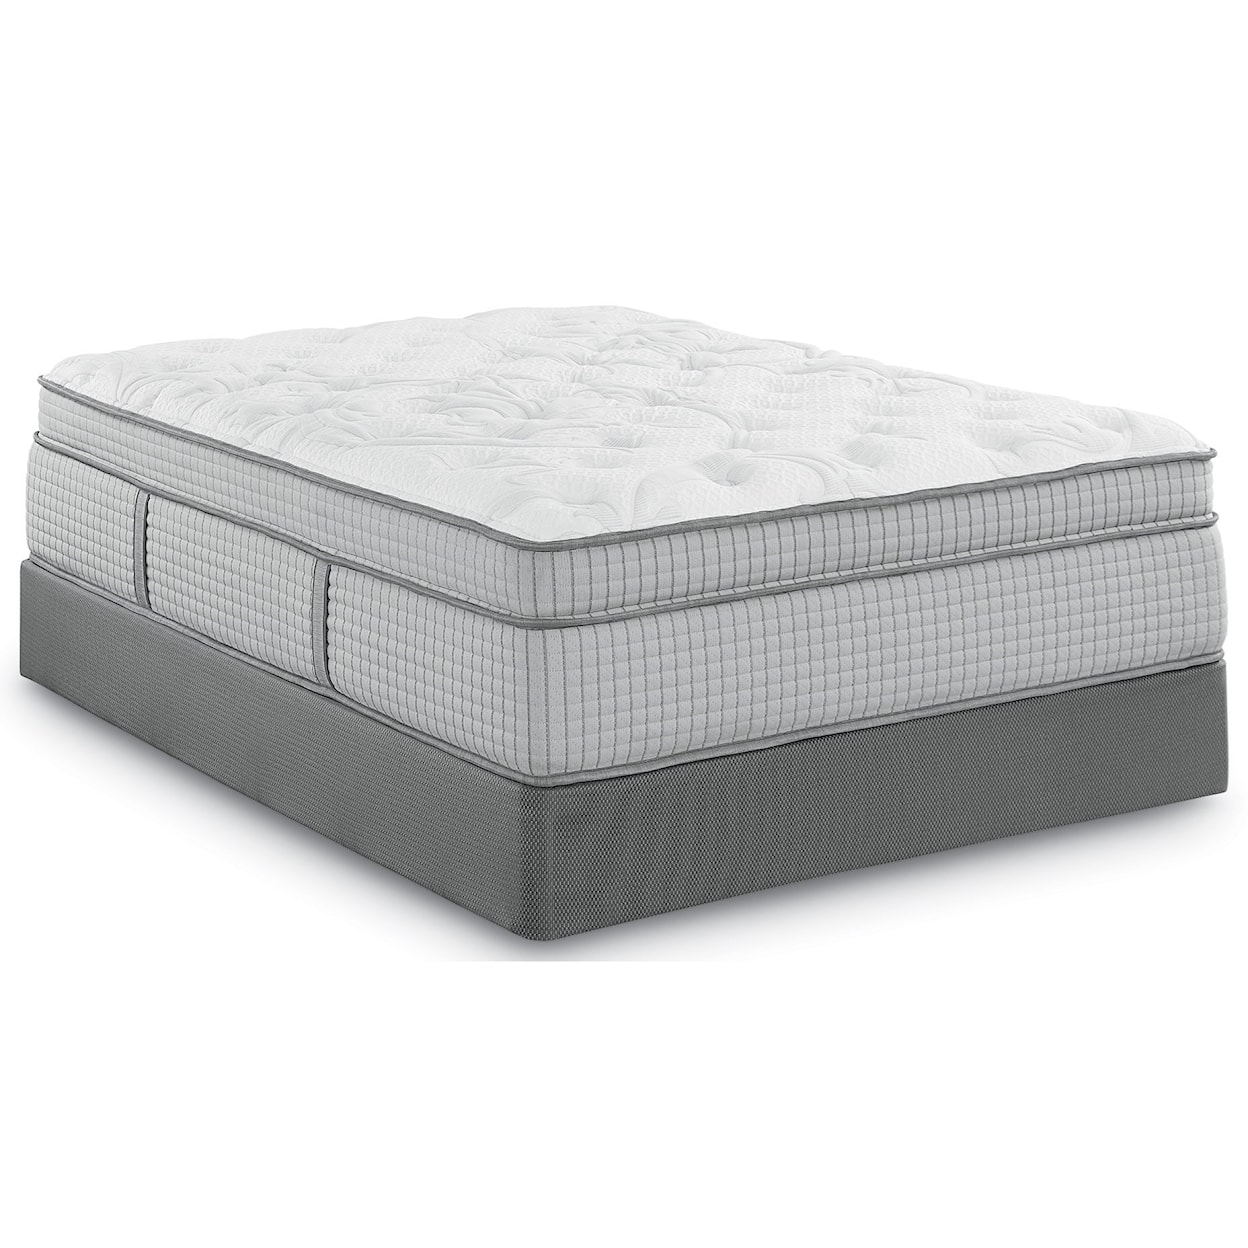 Restonic Biltmore House Euro Top Full Euro Top Coil on Coil Mattress Set